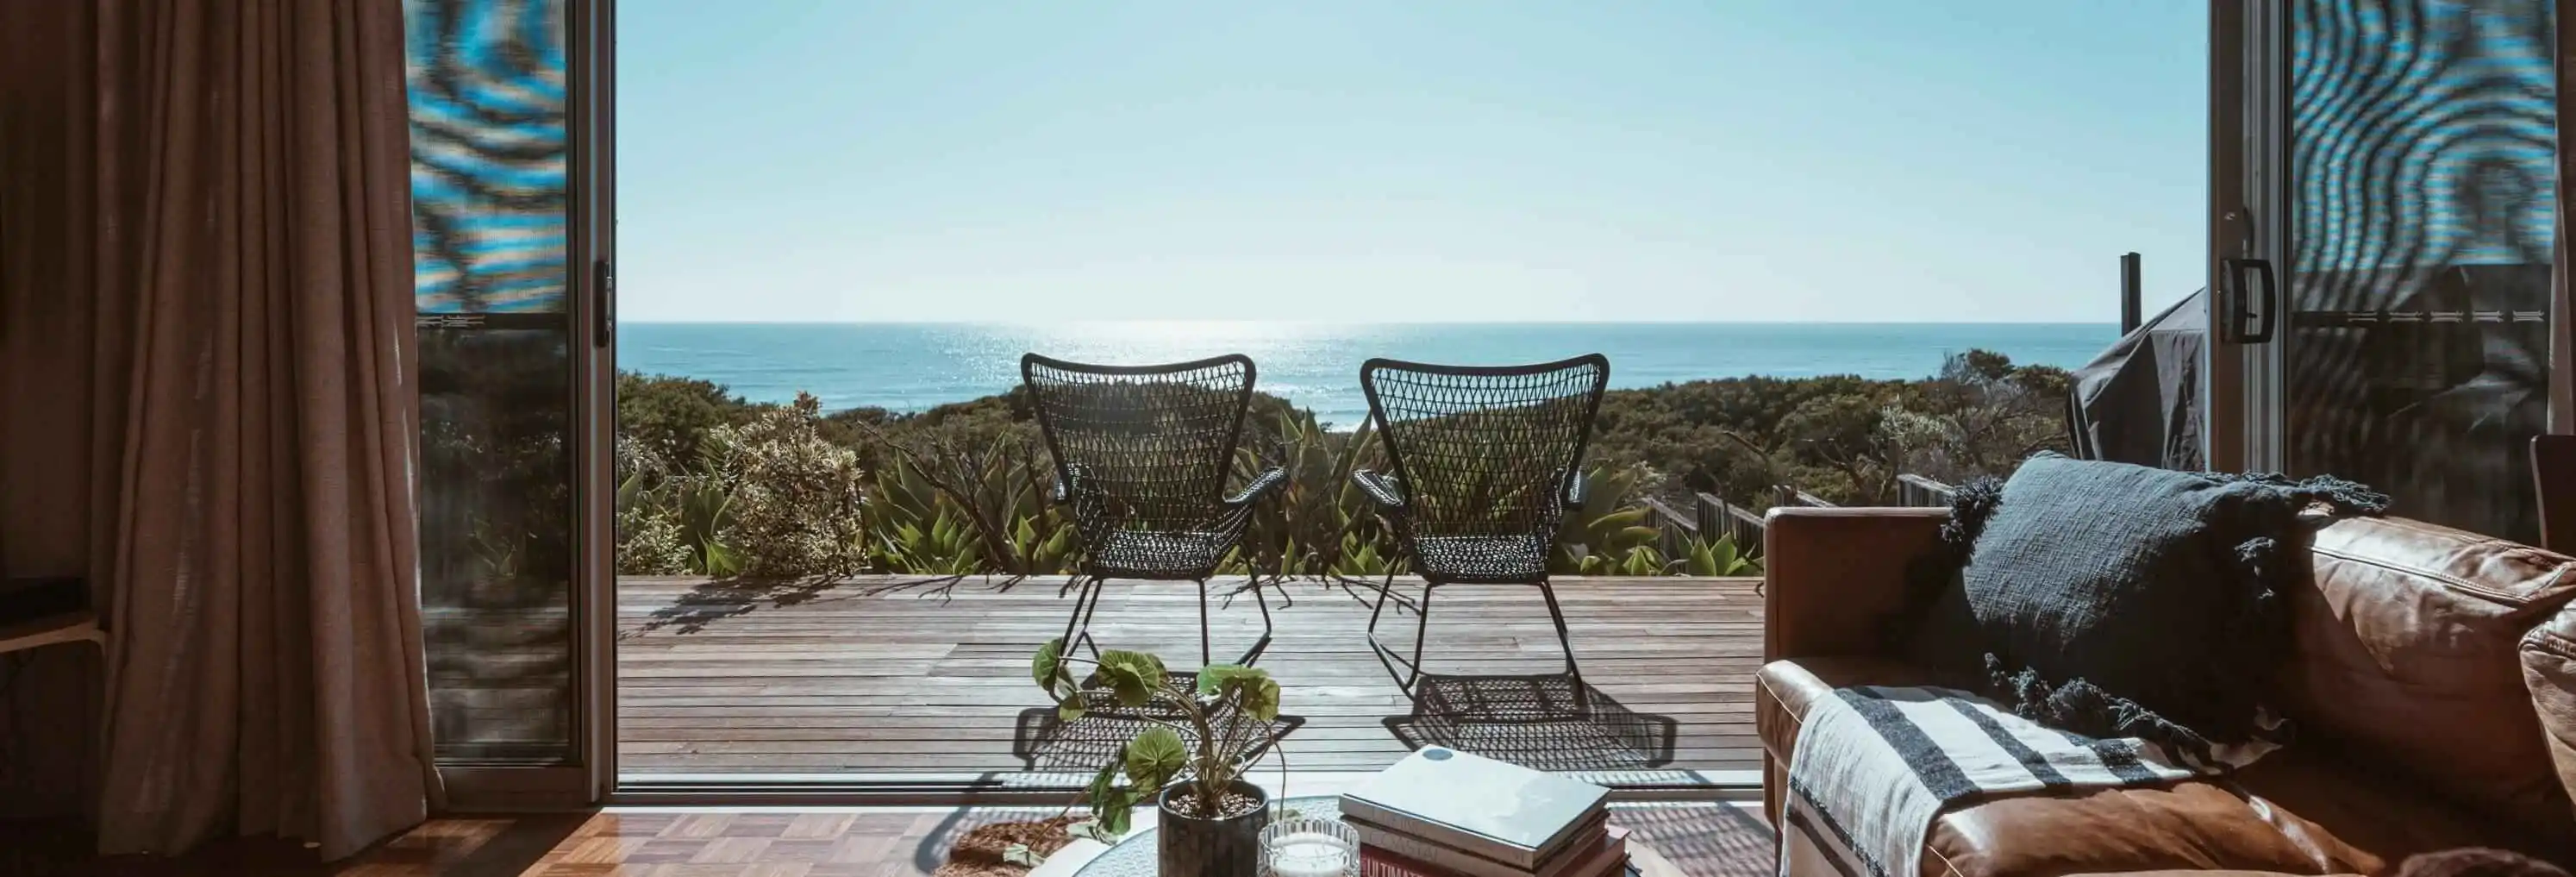 Two chairs on a seaside patio of a house